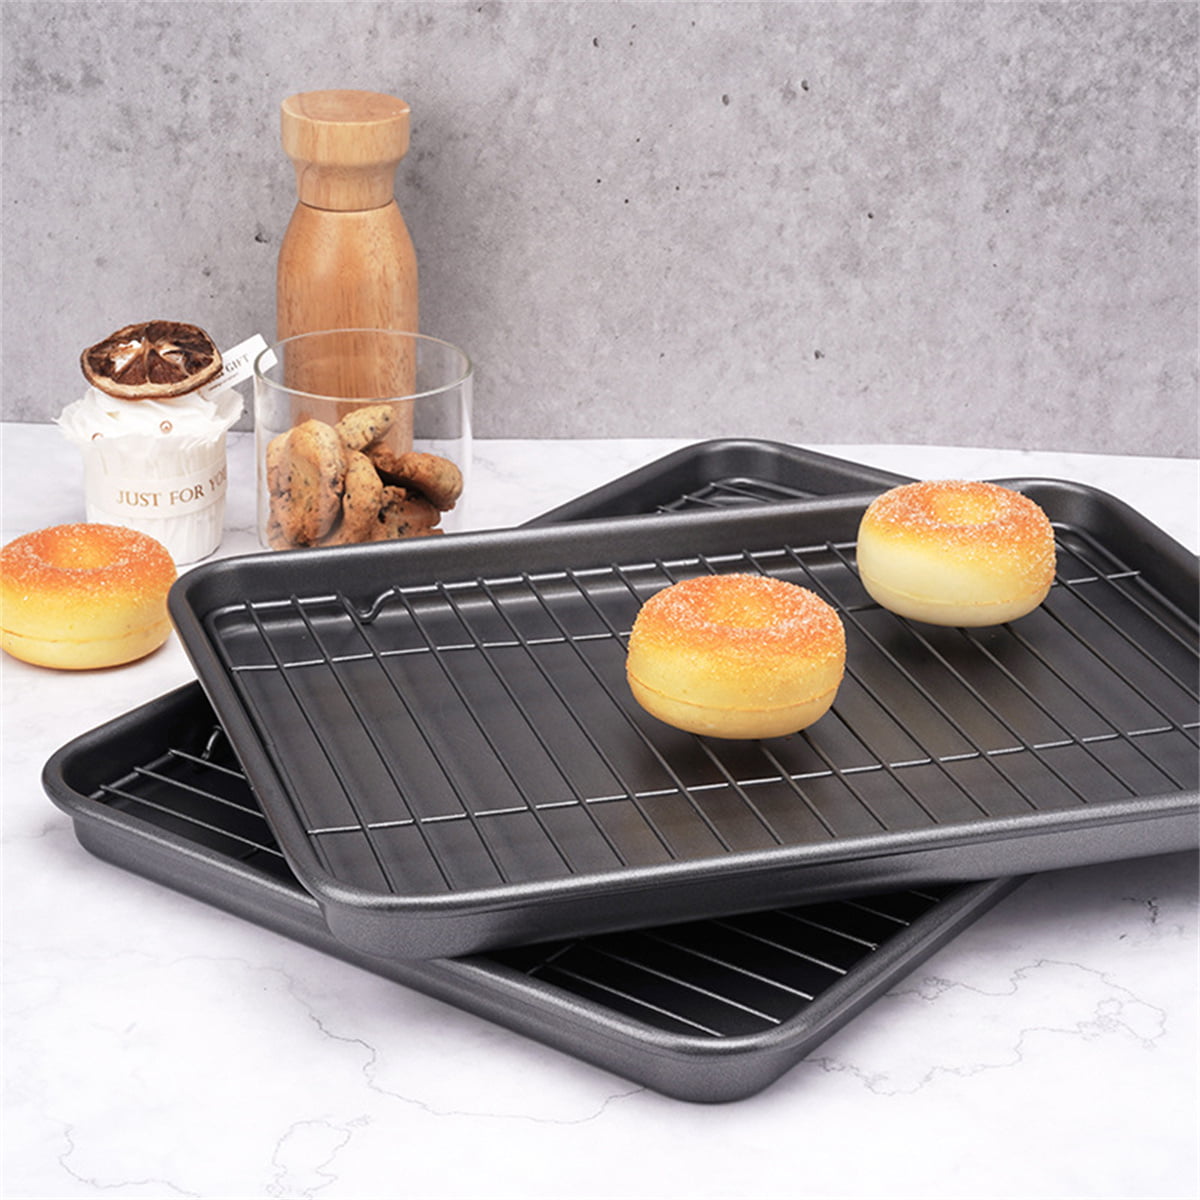 Casewin Baking Sheet Stainless Steel Baking Tray Cookie Sheet Oven Pan  Rectangle Size 10 x 8 x 1 inch, Non Toxic & Healthy, Rust Free & Less  Stick